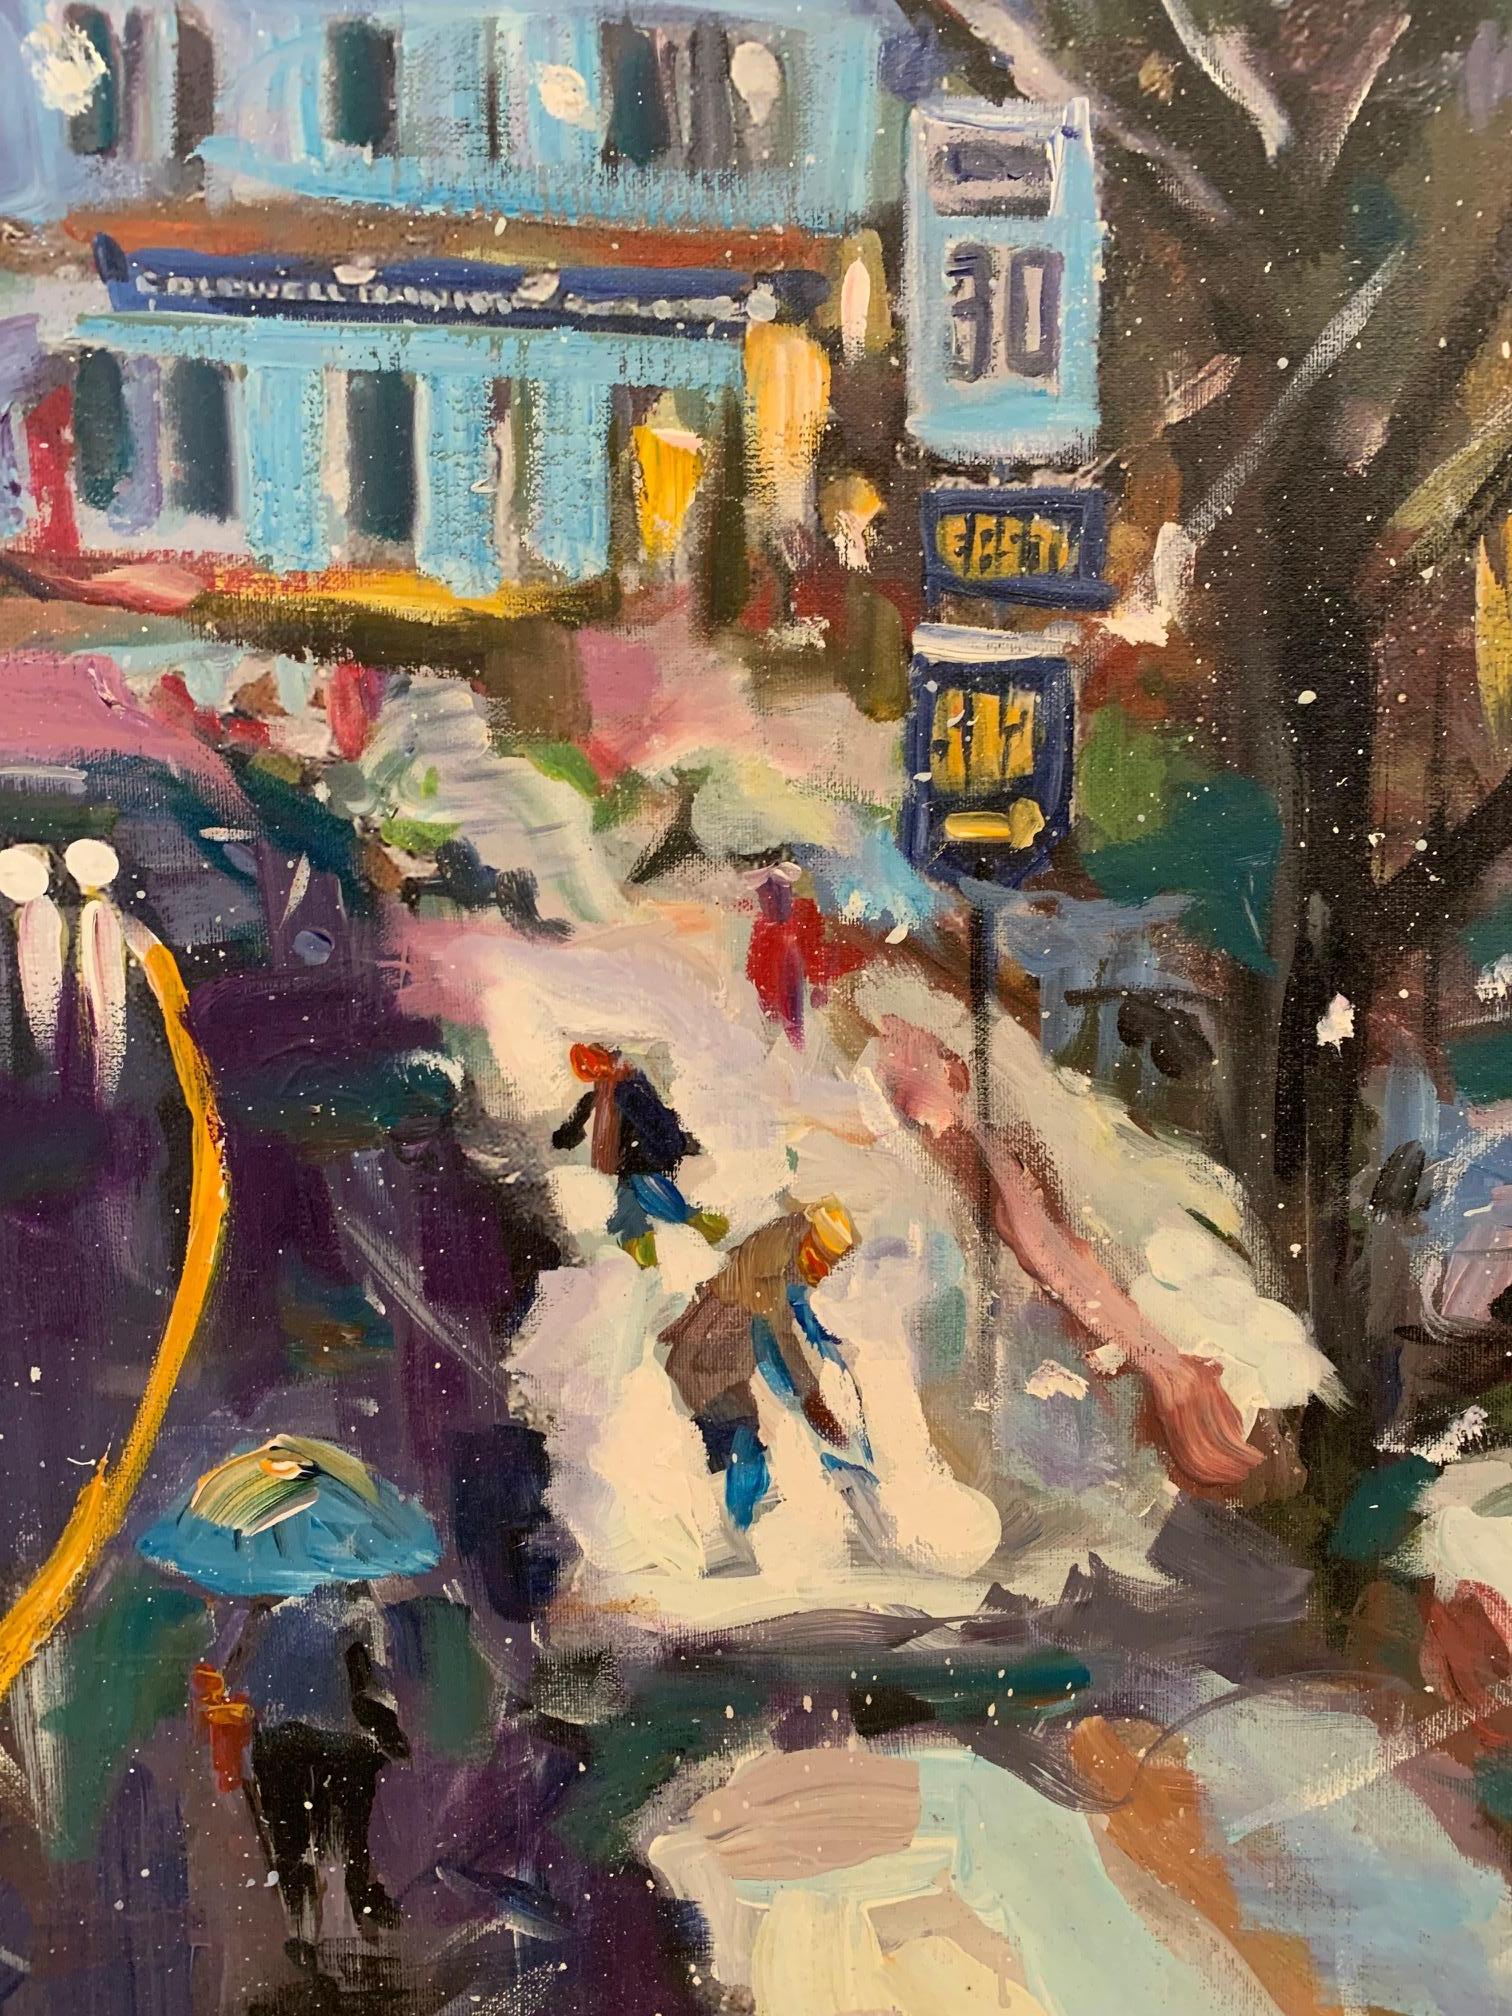 A large and wonderfully rendered original painting of Bernardsville NJ at Christmas, having skillful rough impressionistic brushstrokes in the style of plein air work. The painting has a folk art quality to it. Signed lower right, Reilly.